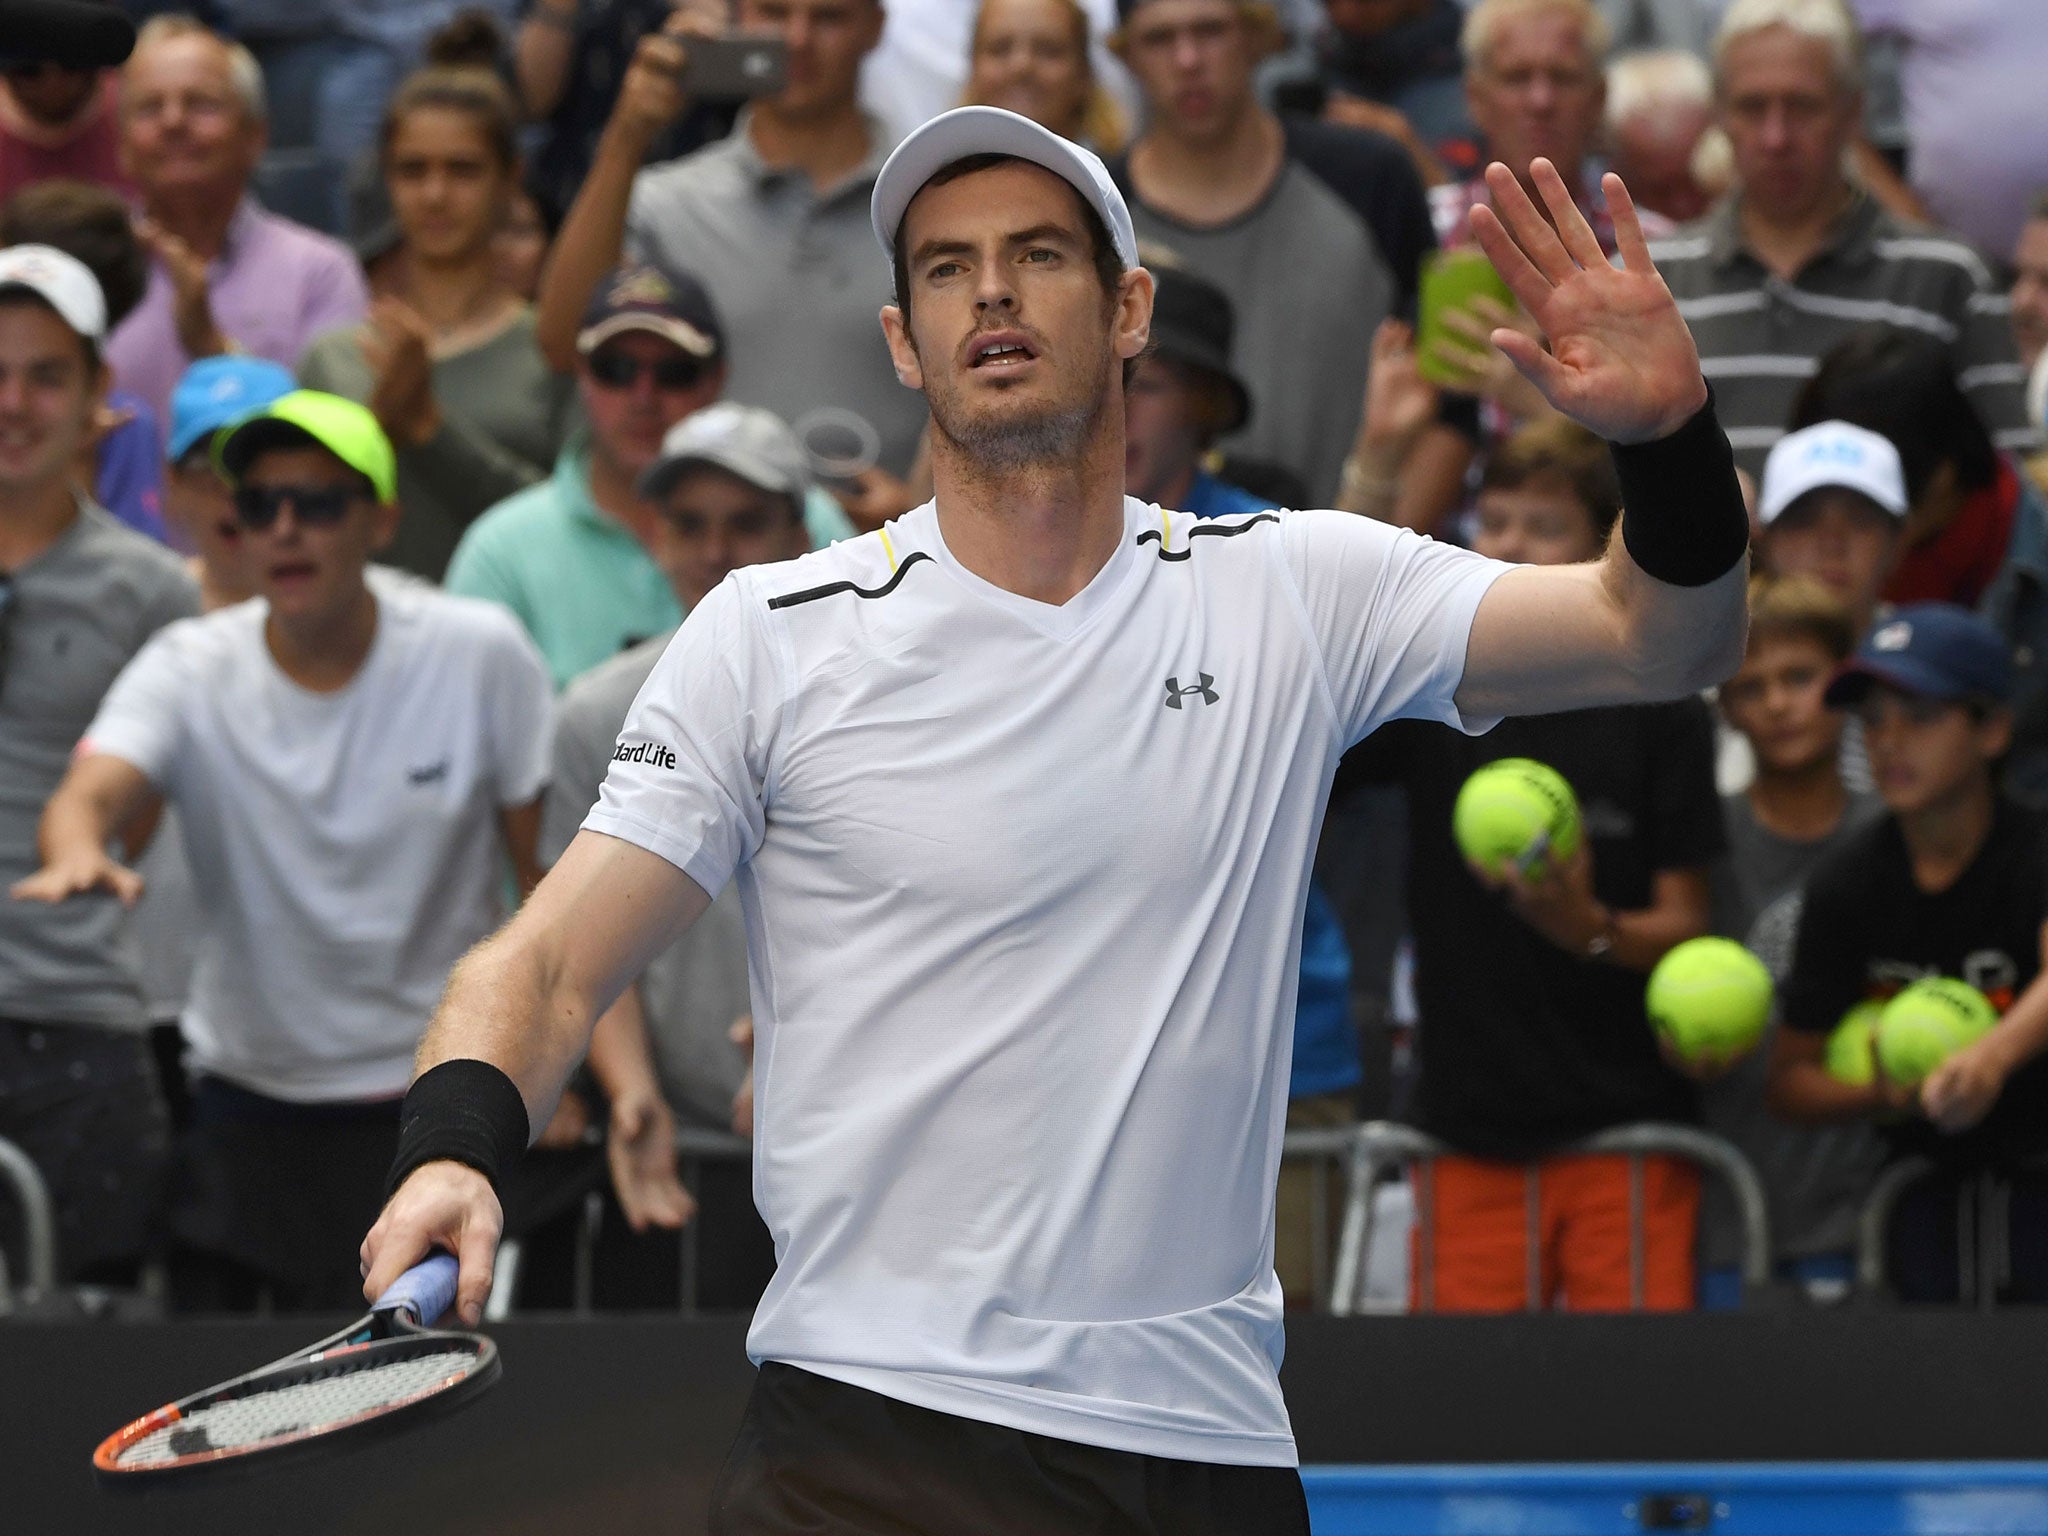 Andy Murray celebrates his victory over Sam Querrey after reaching the Australian Open fourth round